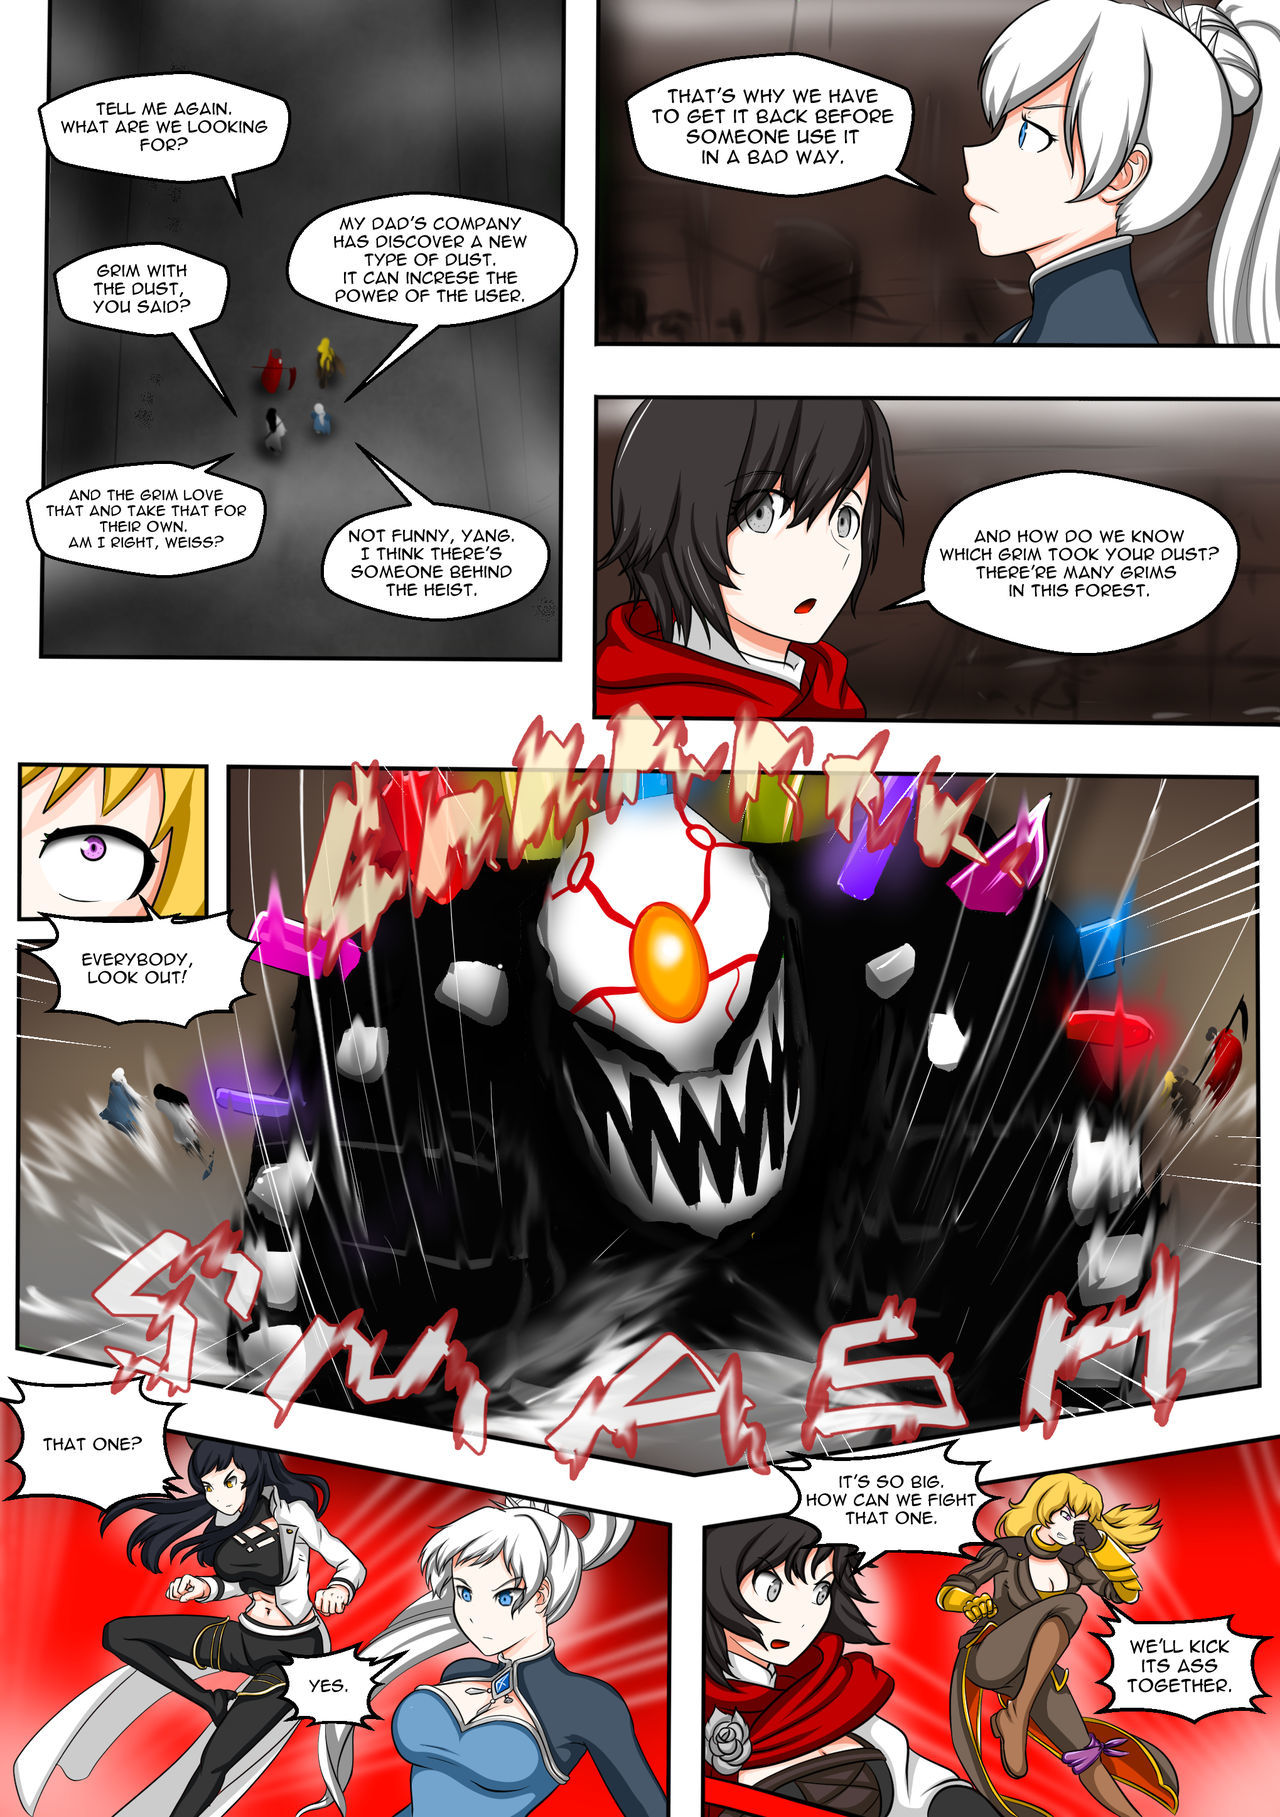 RWBY Dust Expansion (EscapefromExpansion) page 3